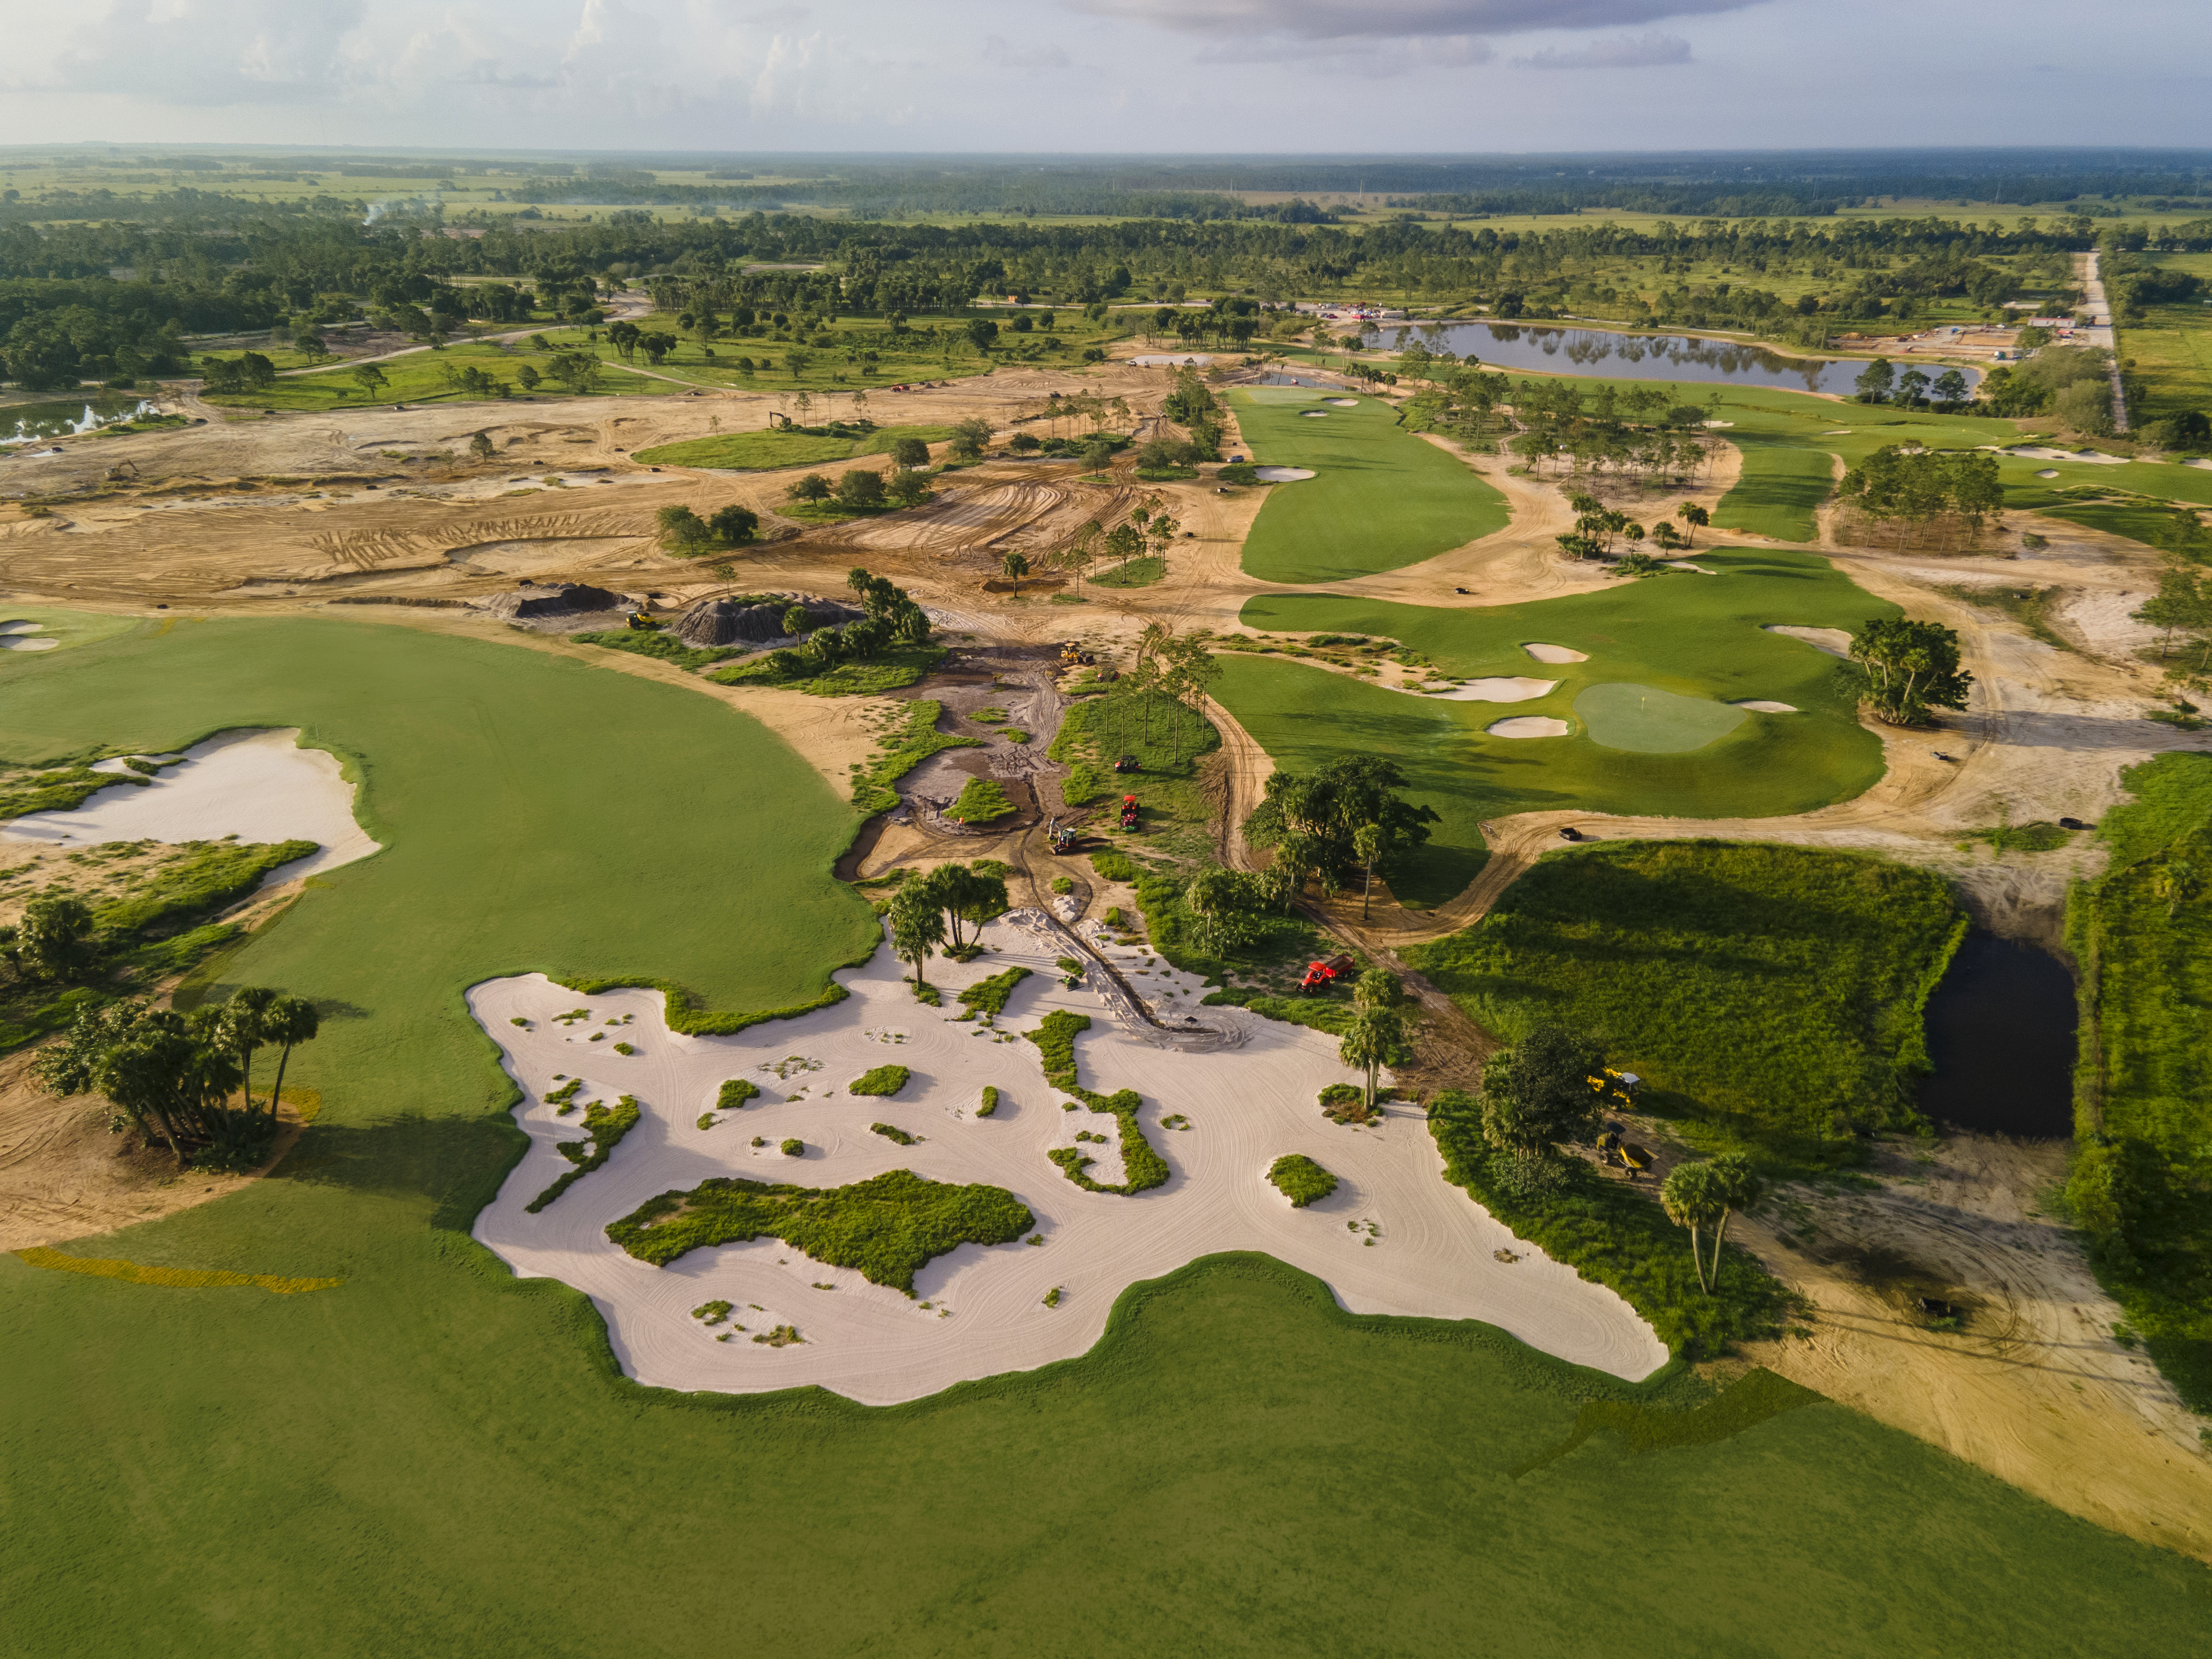 Tee Options on Golf Courses: Supply, Demand and Opportunities